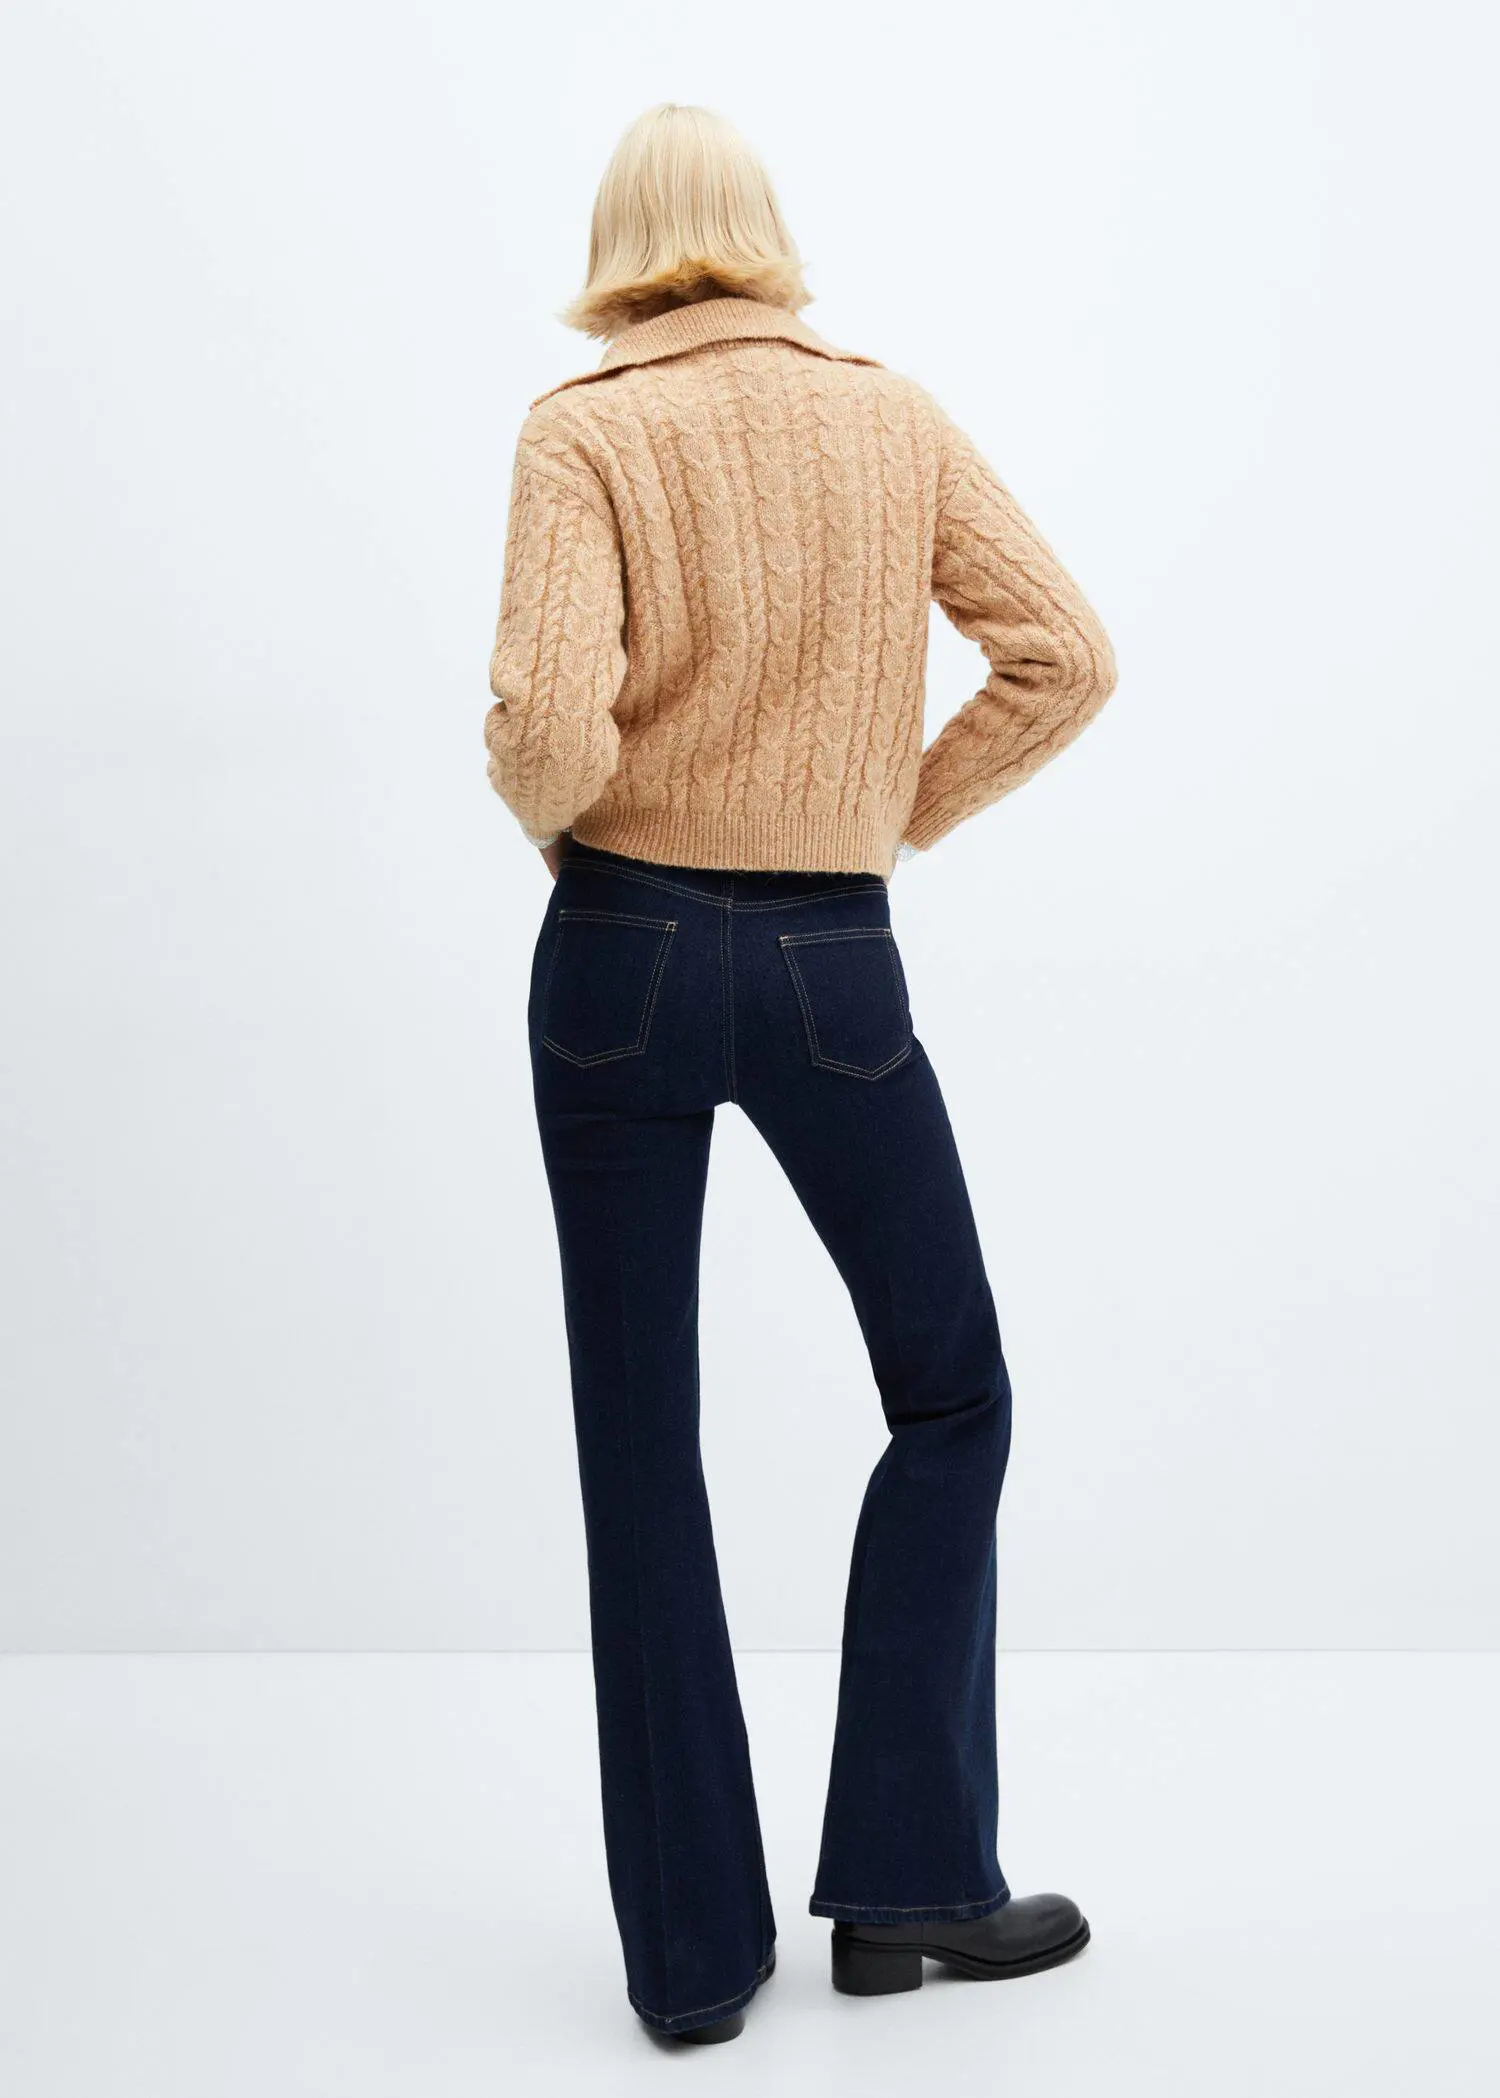 Mango Cable-knit zip-neck sweater. 3